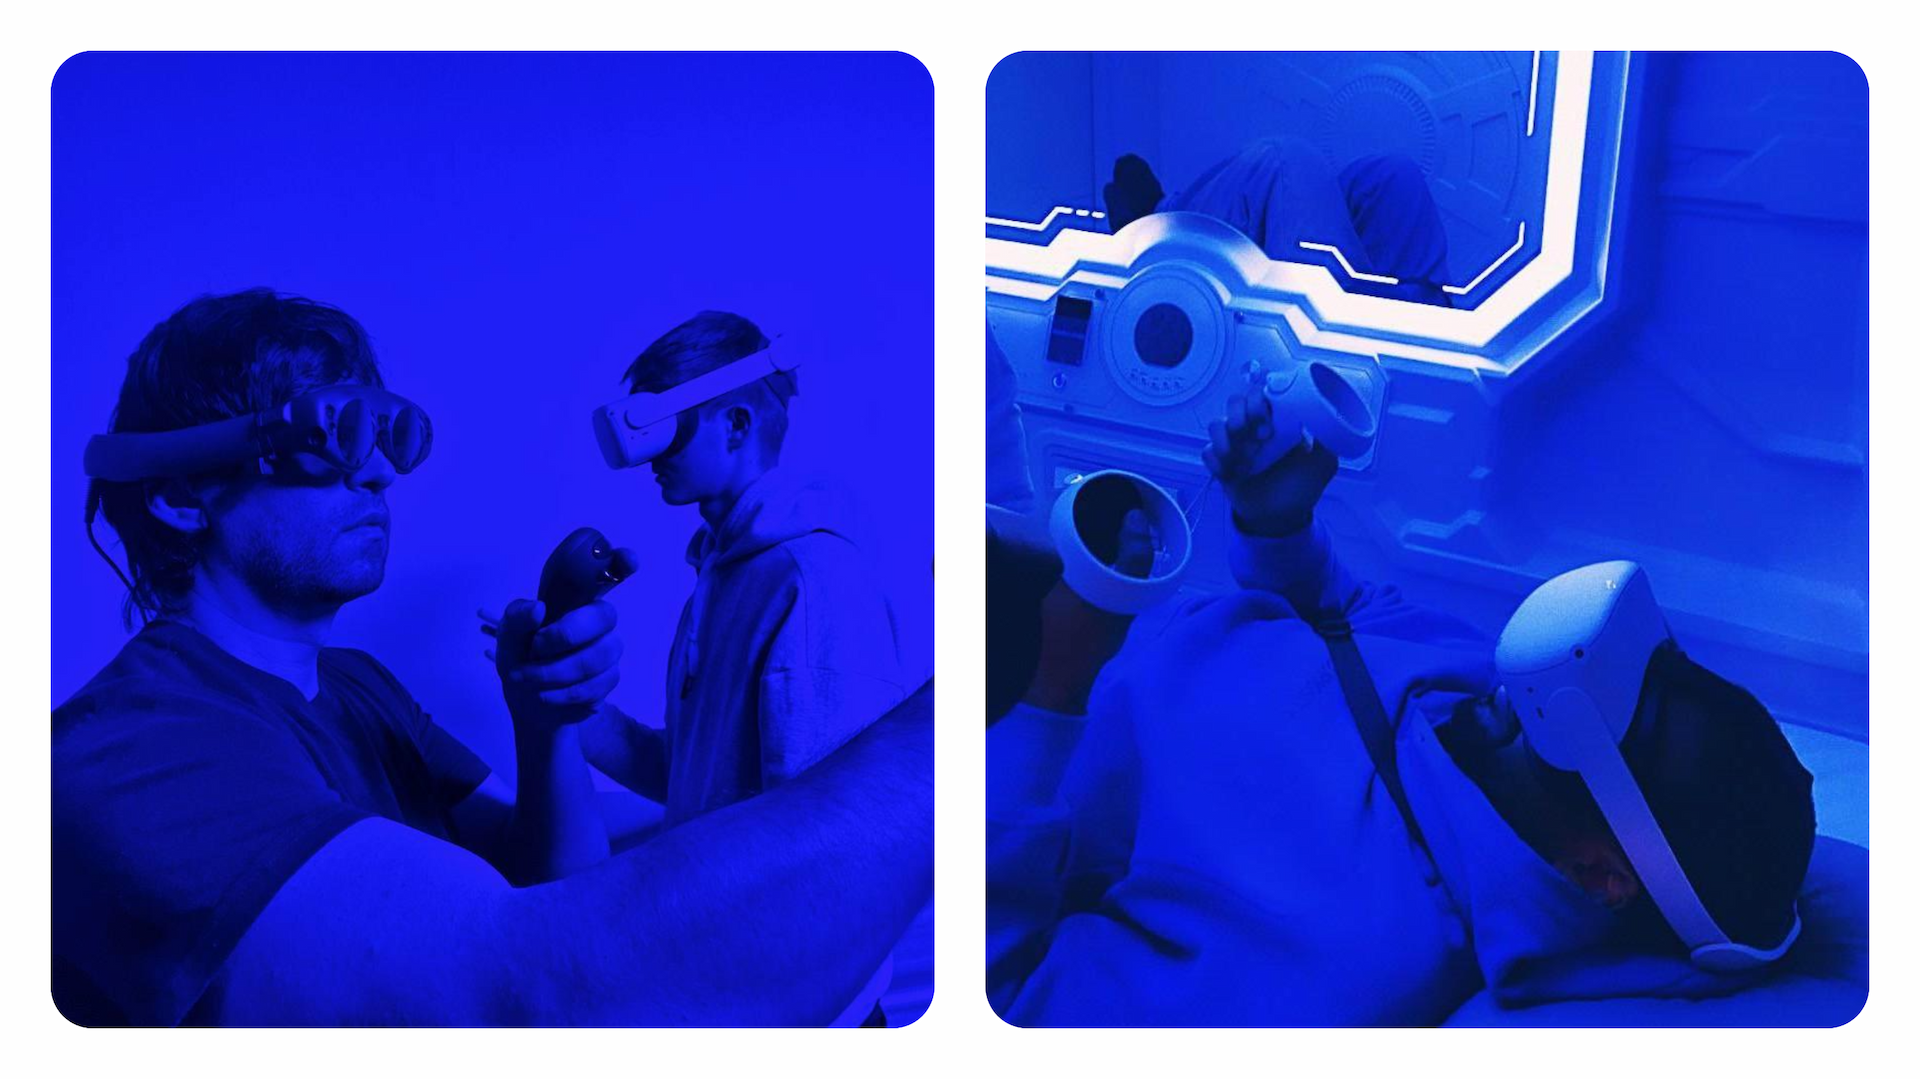 Two side-by-side images featuring individuals using virtual reality headsets and controllers in a room illuminated with blue light.